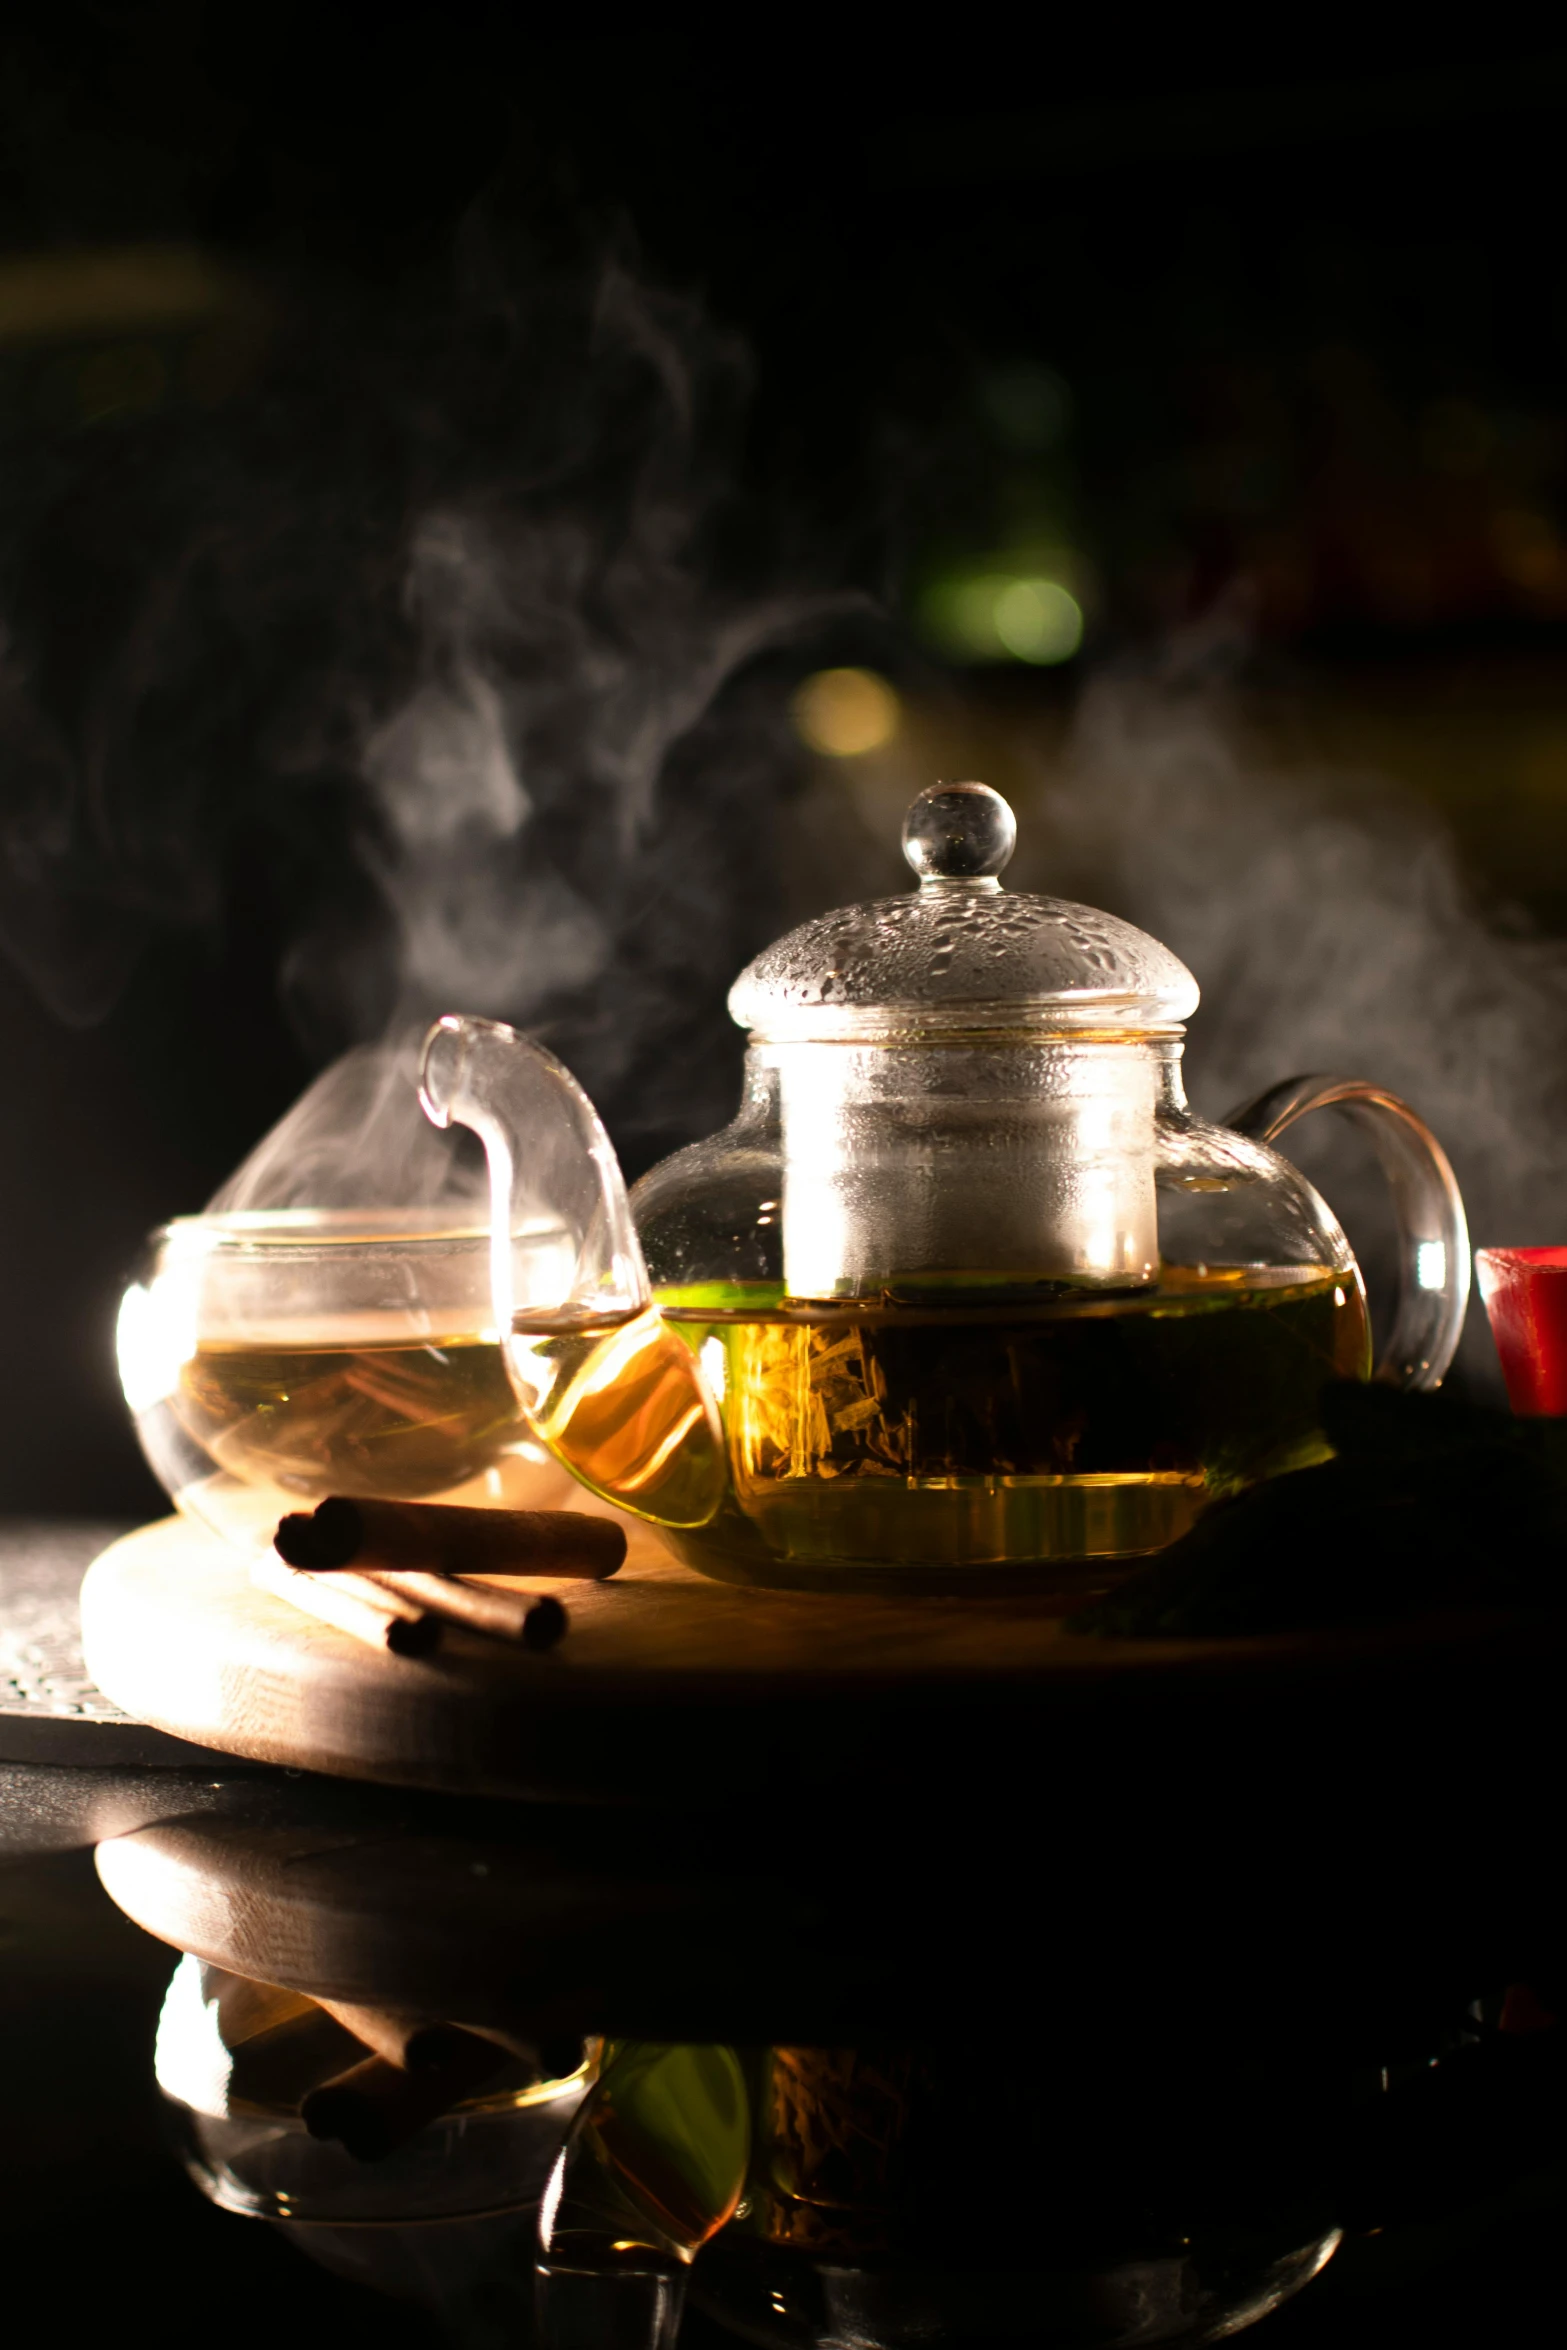 a tea pot sitting on top of a wooden tray, a still life, pexels, lights and smoke, taverns nighttime lifestyle, green tea, enhanced